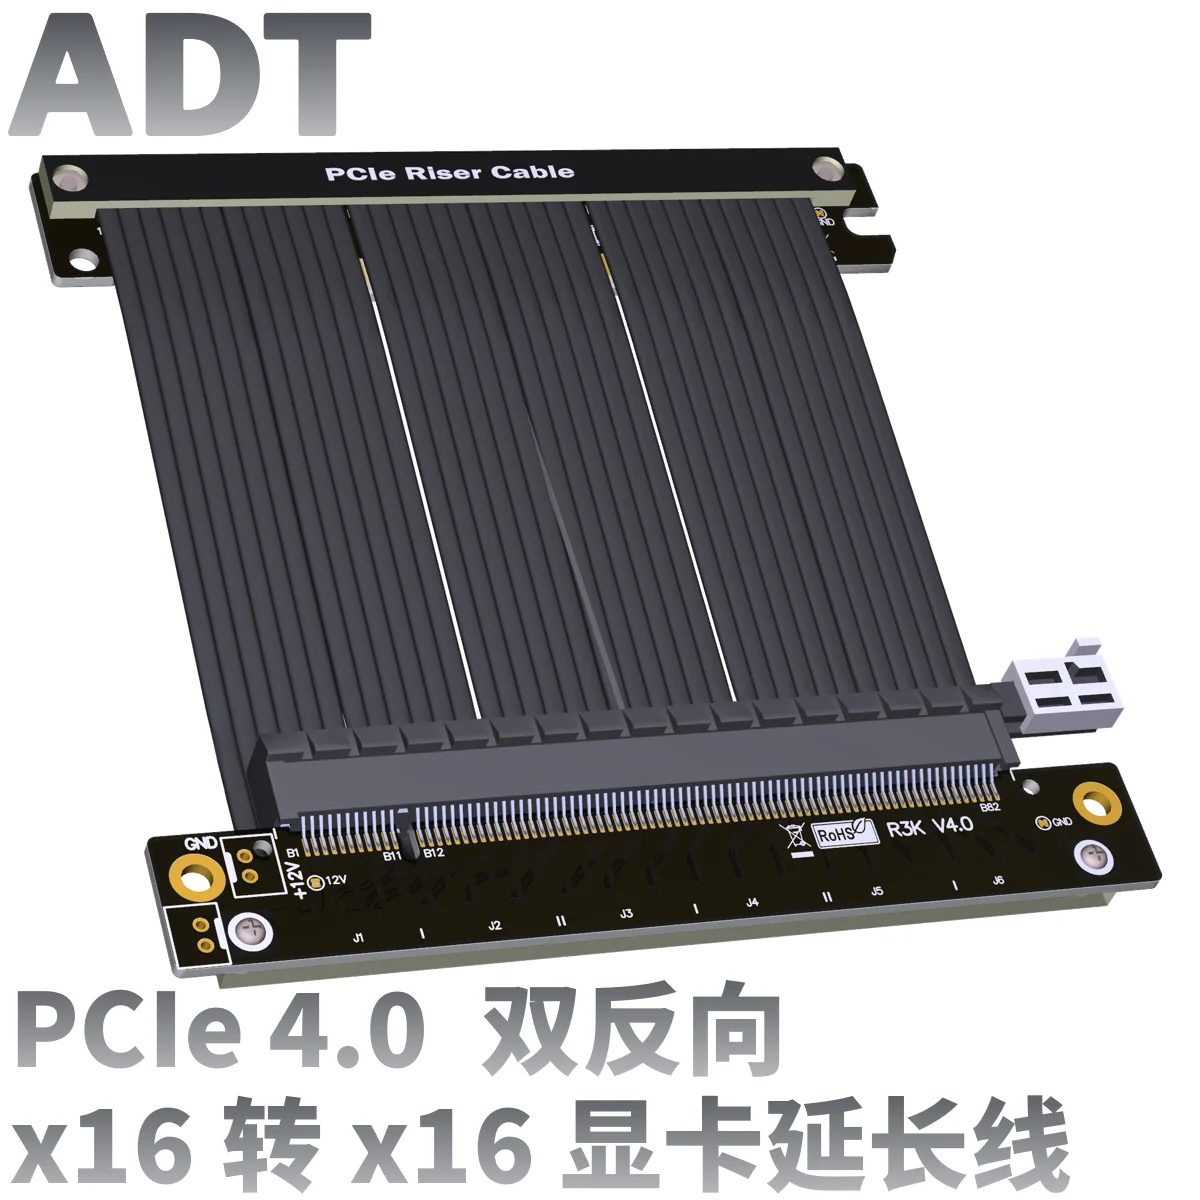 ADT PCI-E 4.0 Dual Reverse Graphics Extension Cable  PCIe 4.0 X16 Full-speed Stable ITX A4 Compatible Chassis